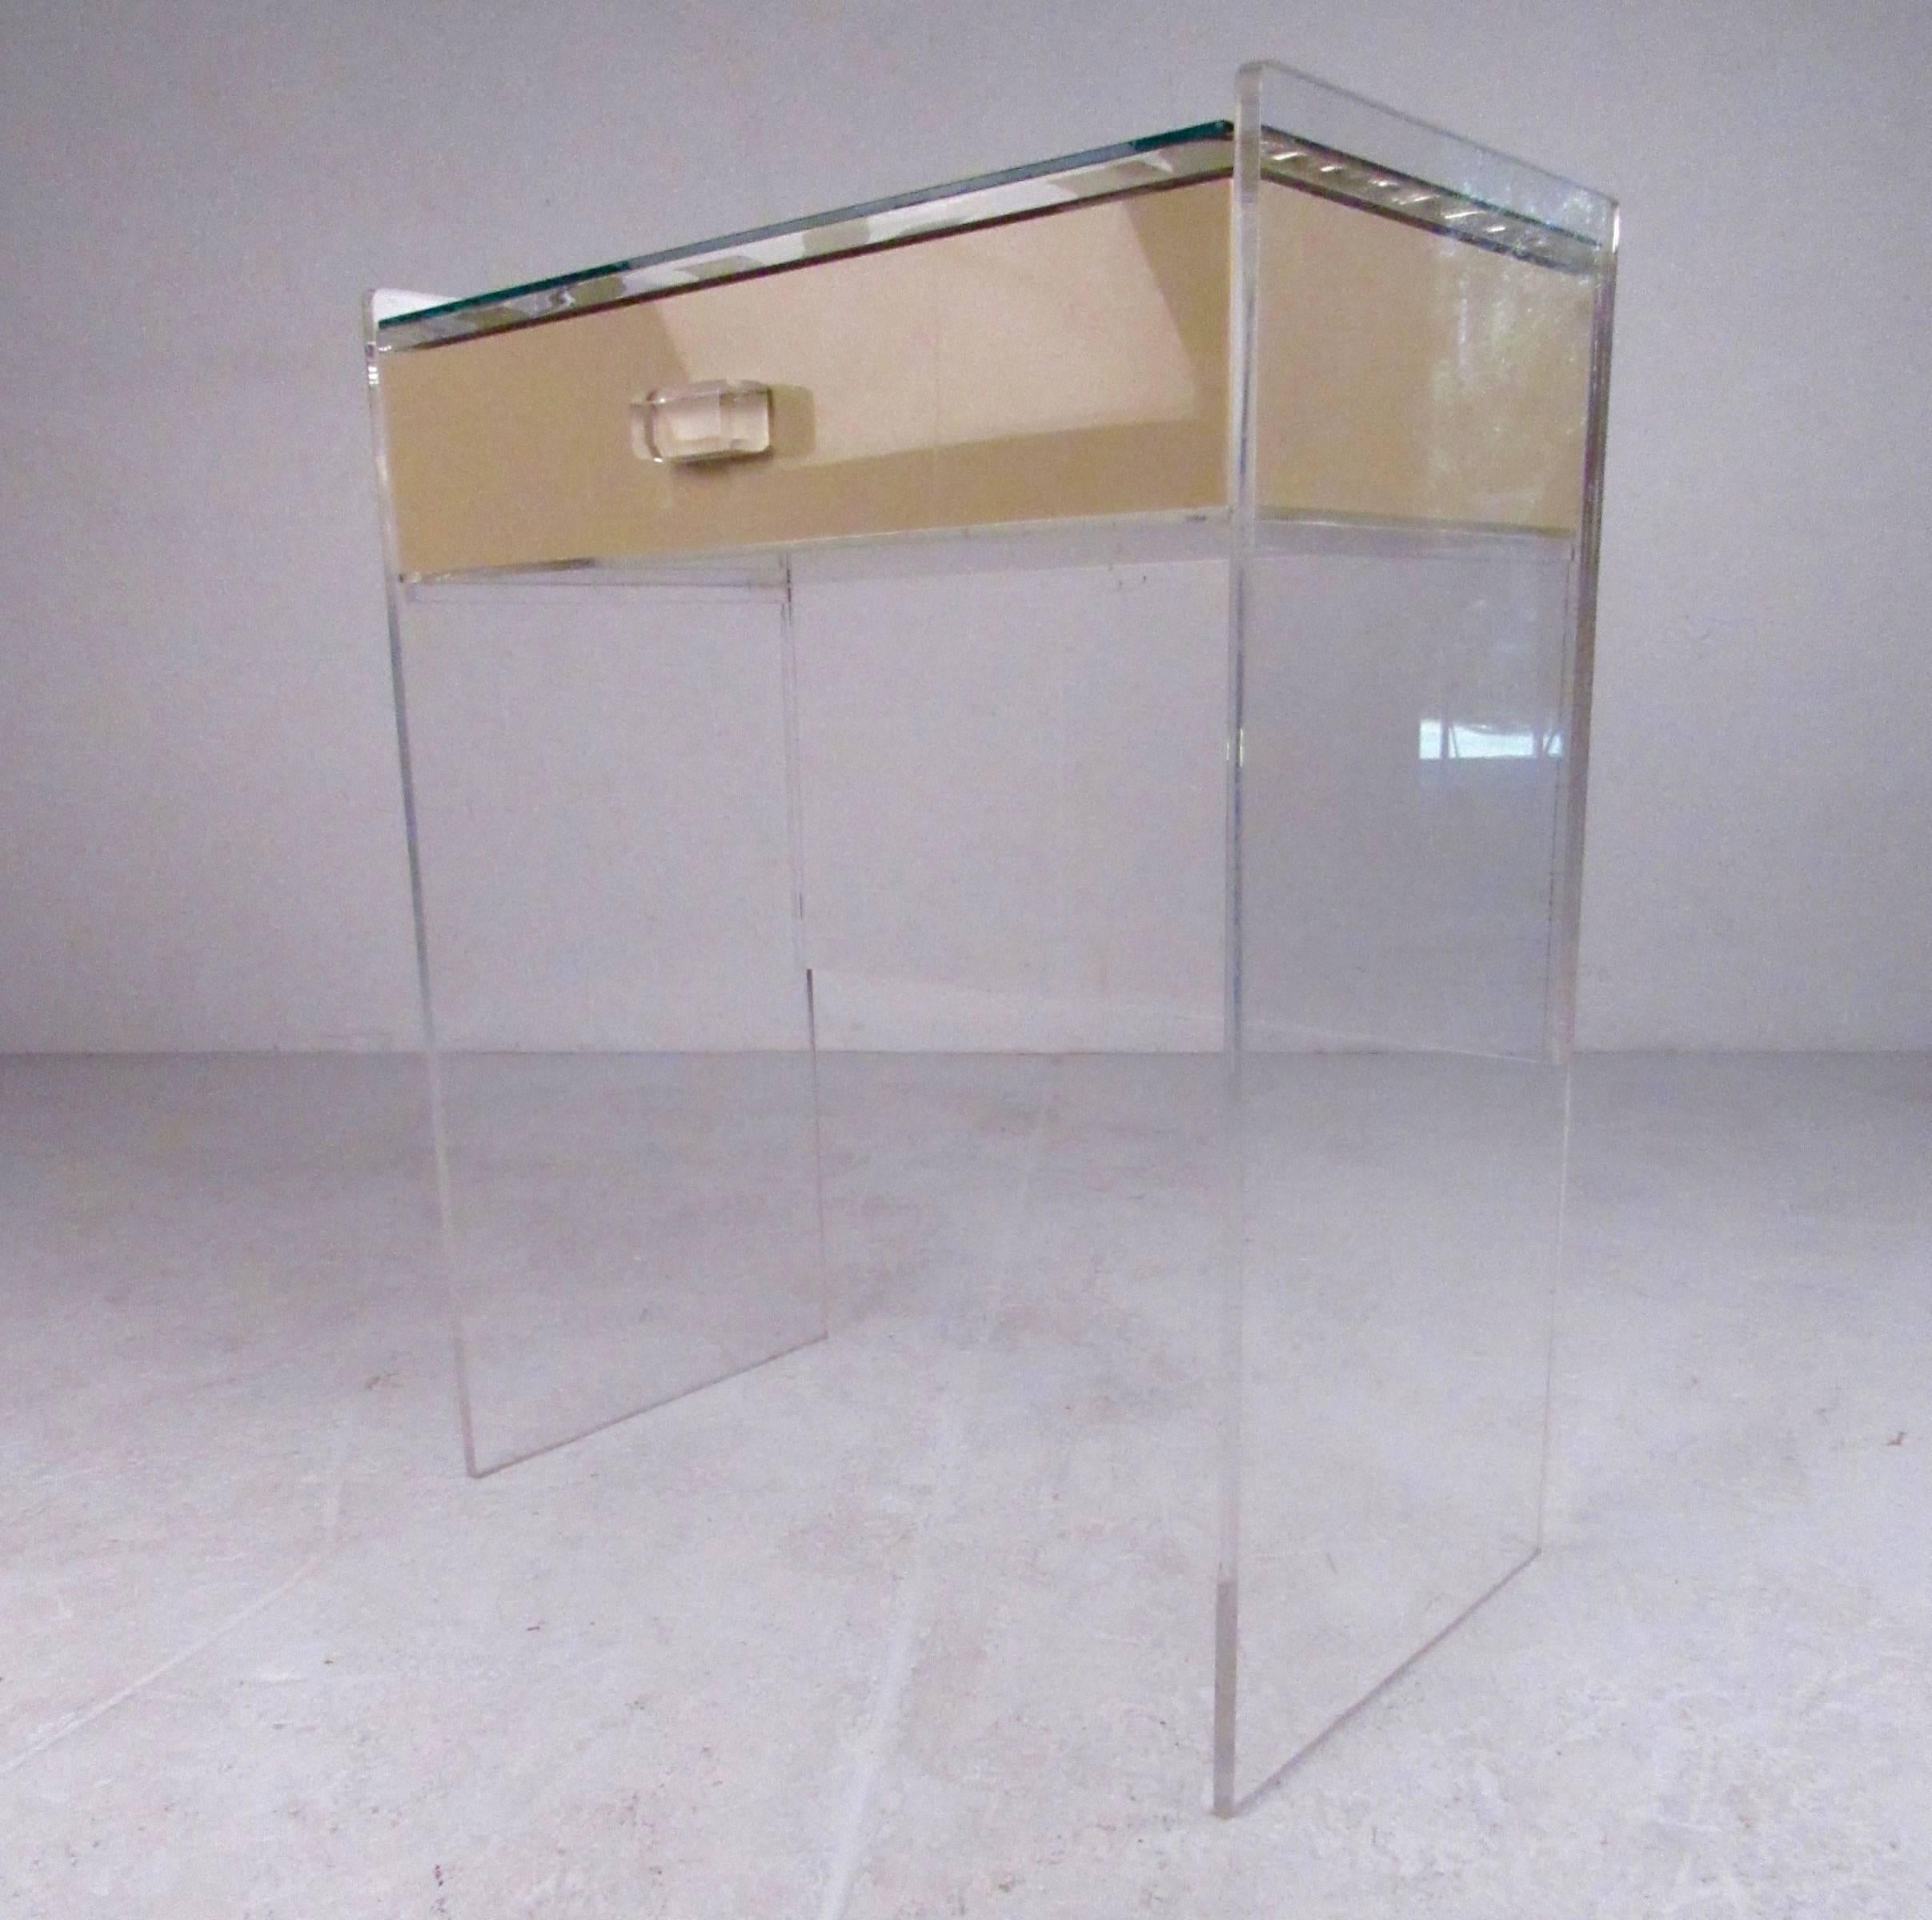 This vintage modern vanity table features stylish acrylic and mirror construction with, and Charles Hollis Jones style design. Spacious top drawer makes this unique console table the perfect makeup table or vanity piece for home or business, while